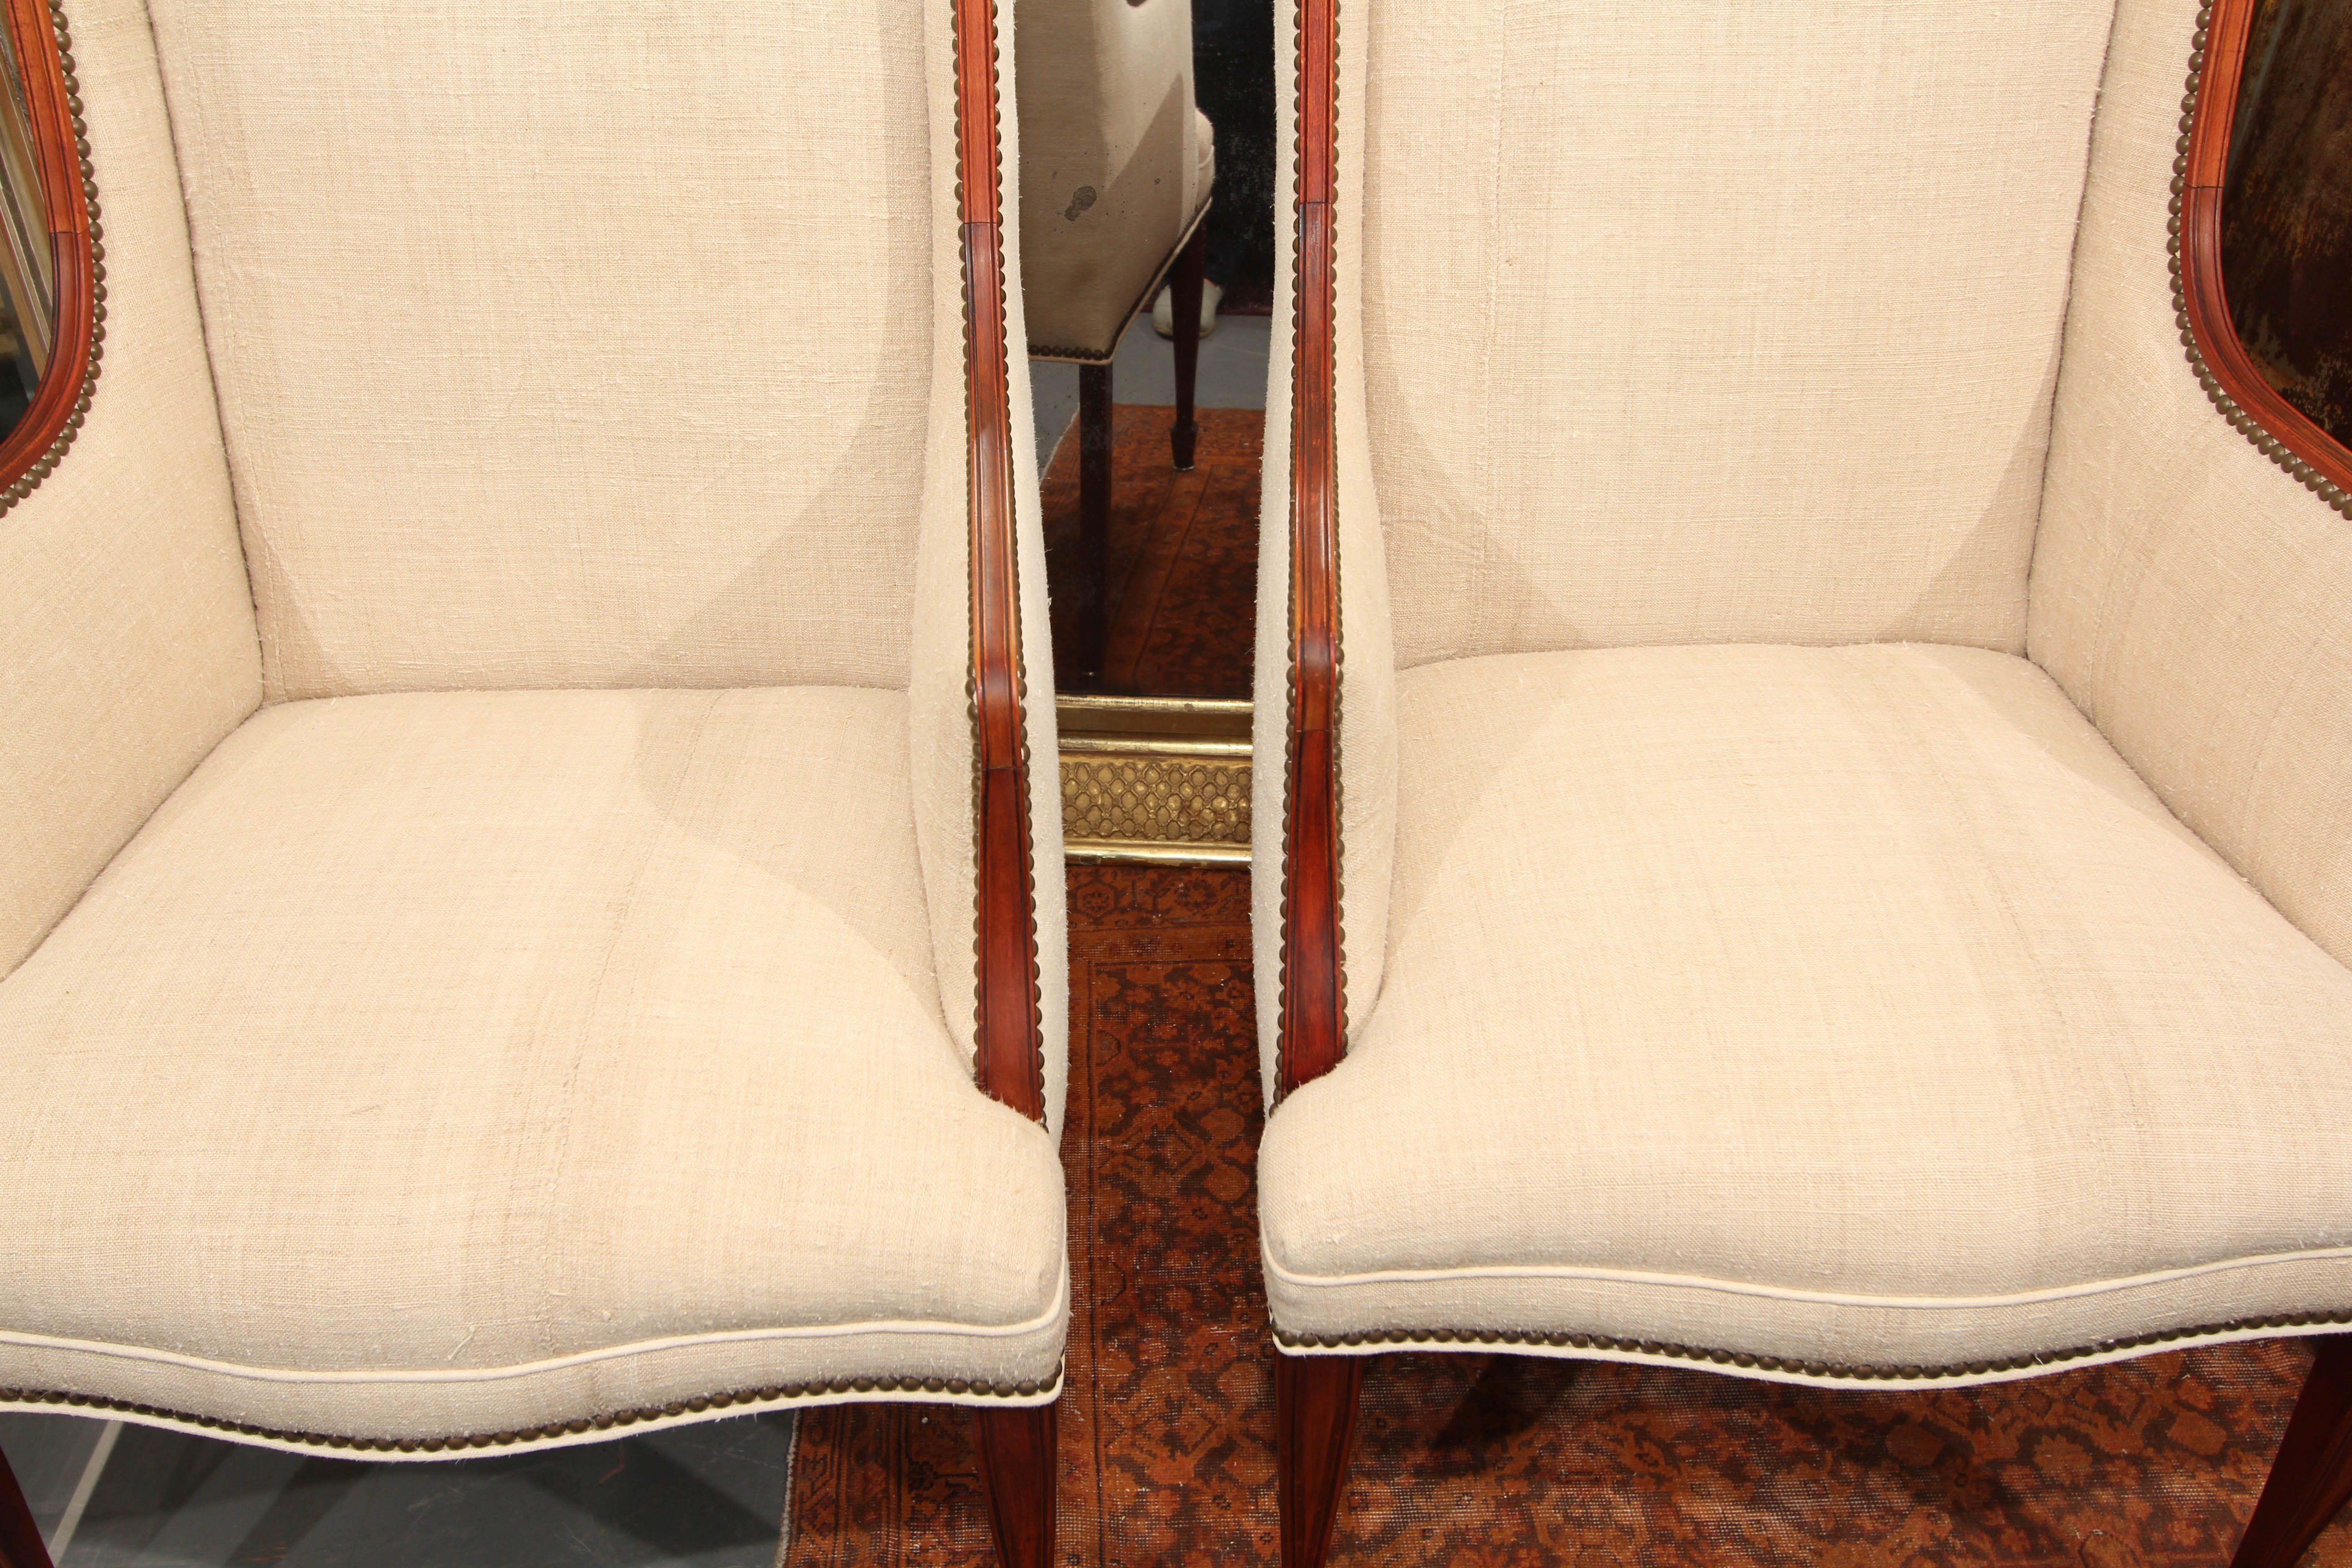 Comfortable pair of high backed mid century side chairs reupholstered in heavy hand loomed linen and trimmed in nailheads.  Very versatile form and size